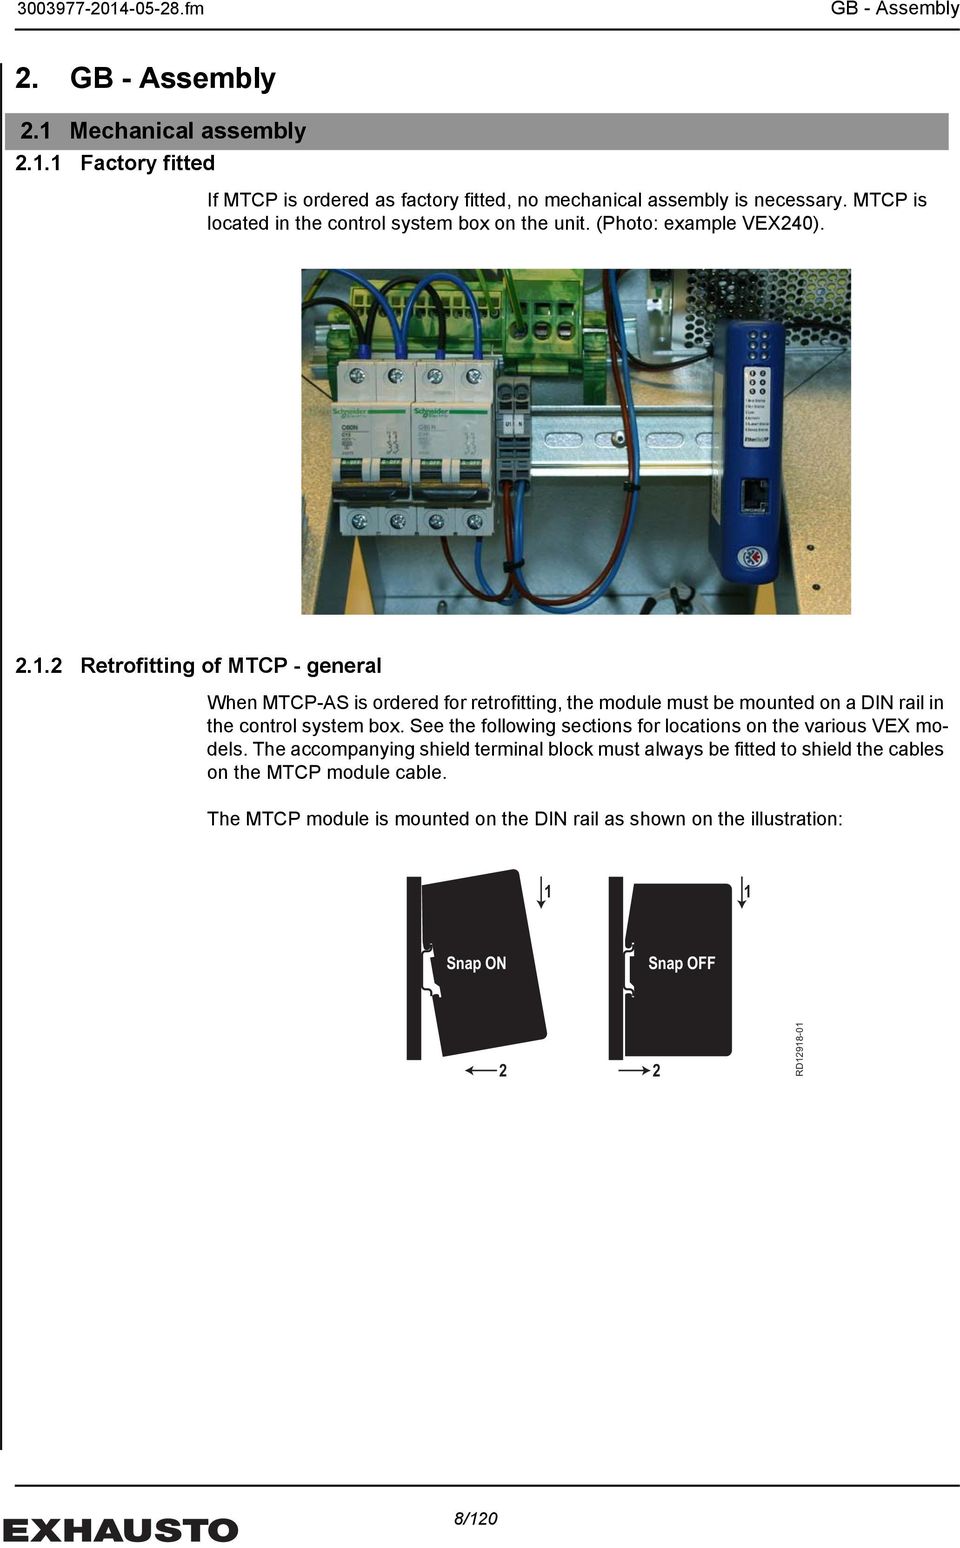 2 Retrofitting of MTCP - general When MTCP-AS is ordered for retrofitting, the module must be mounted on a DIN rail in the control system box.